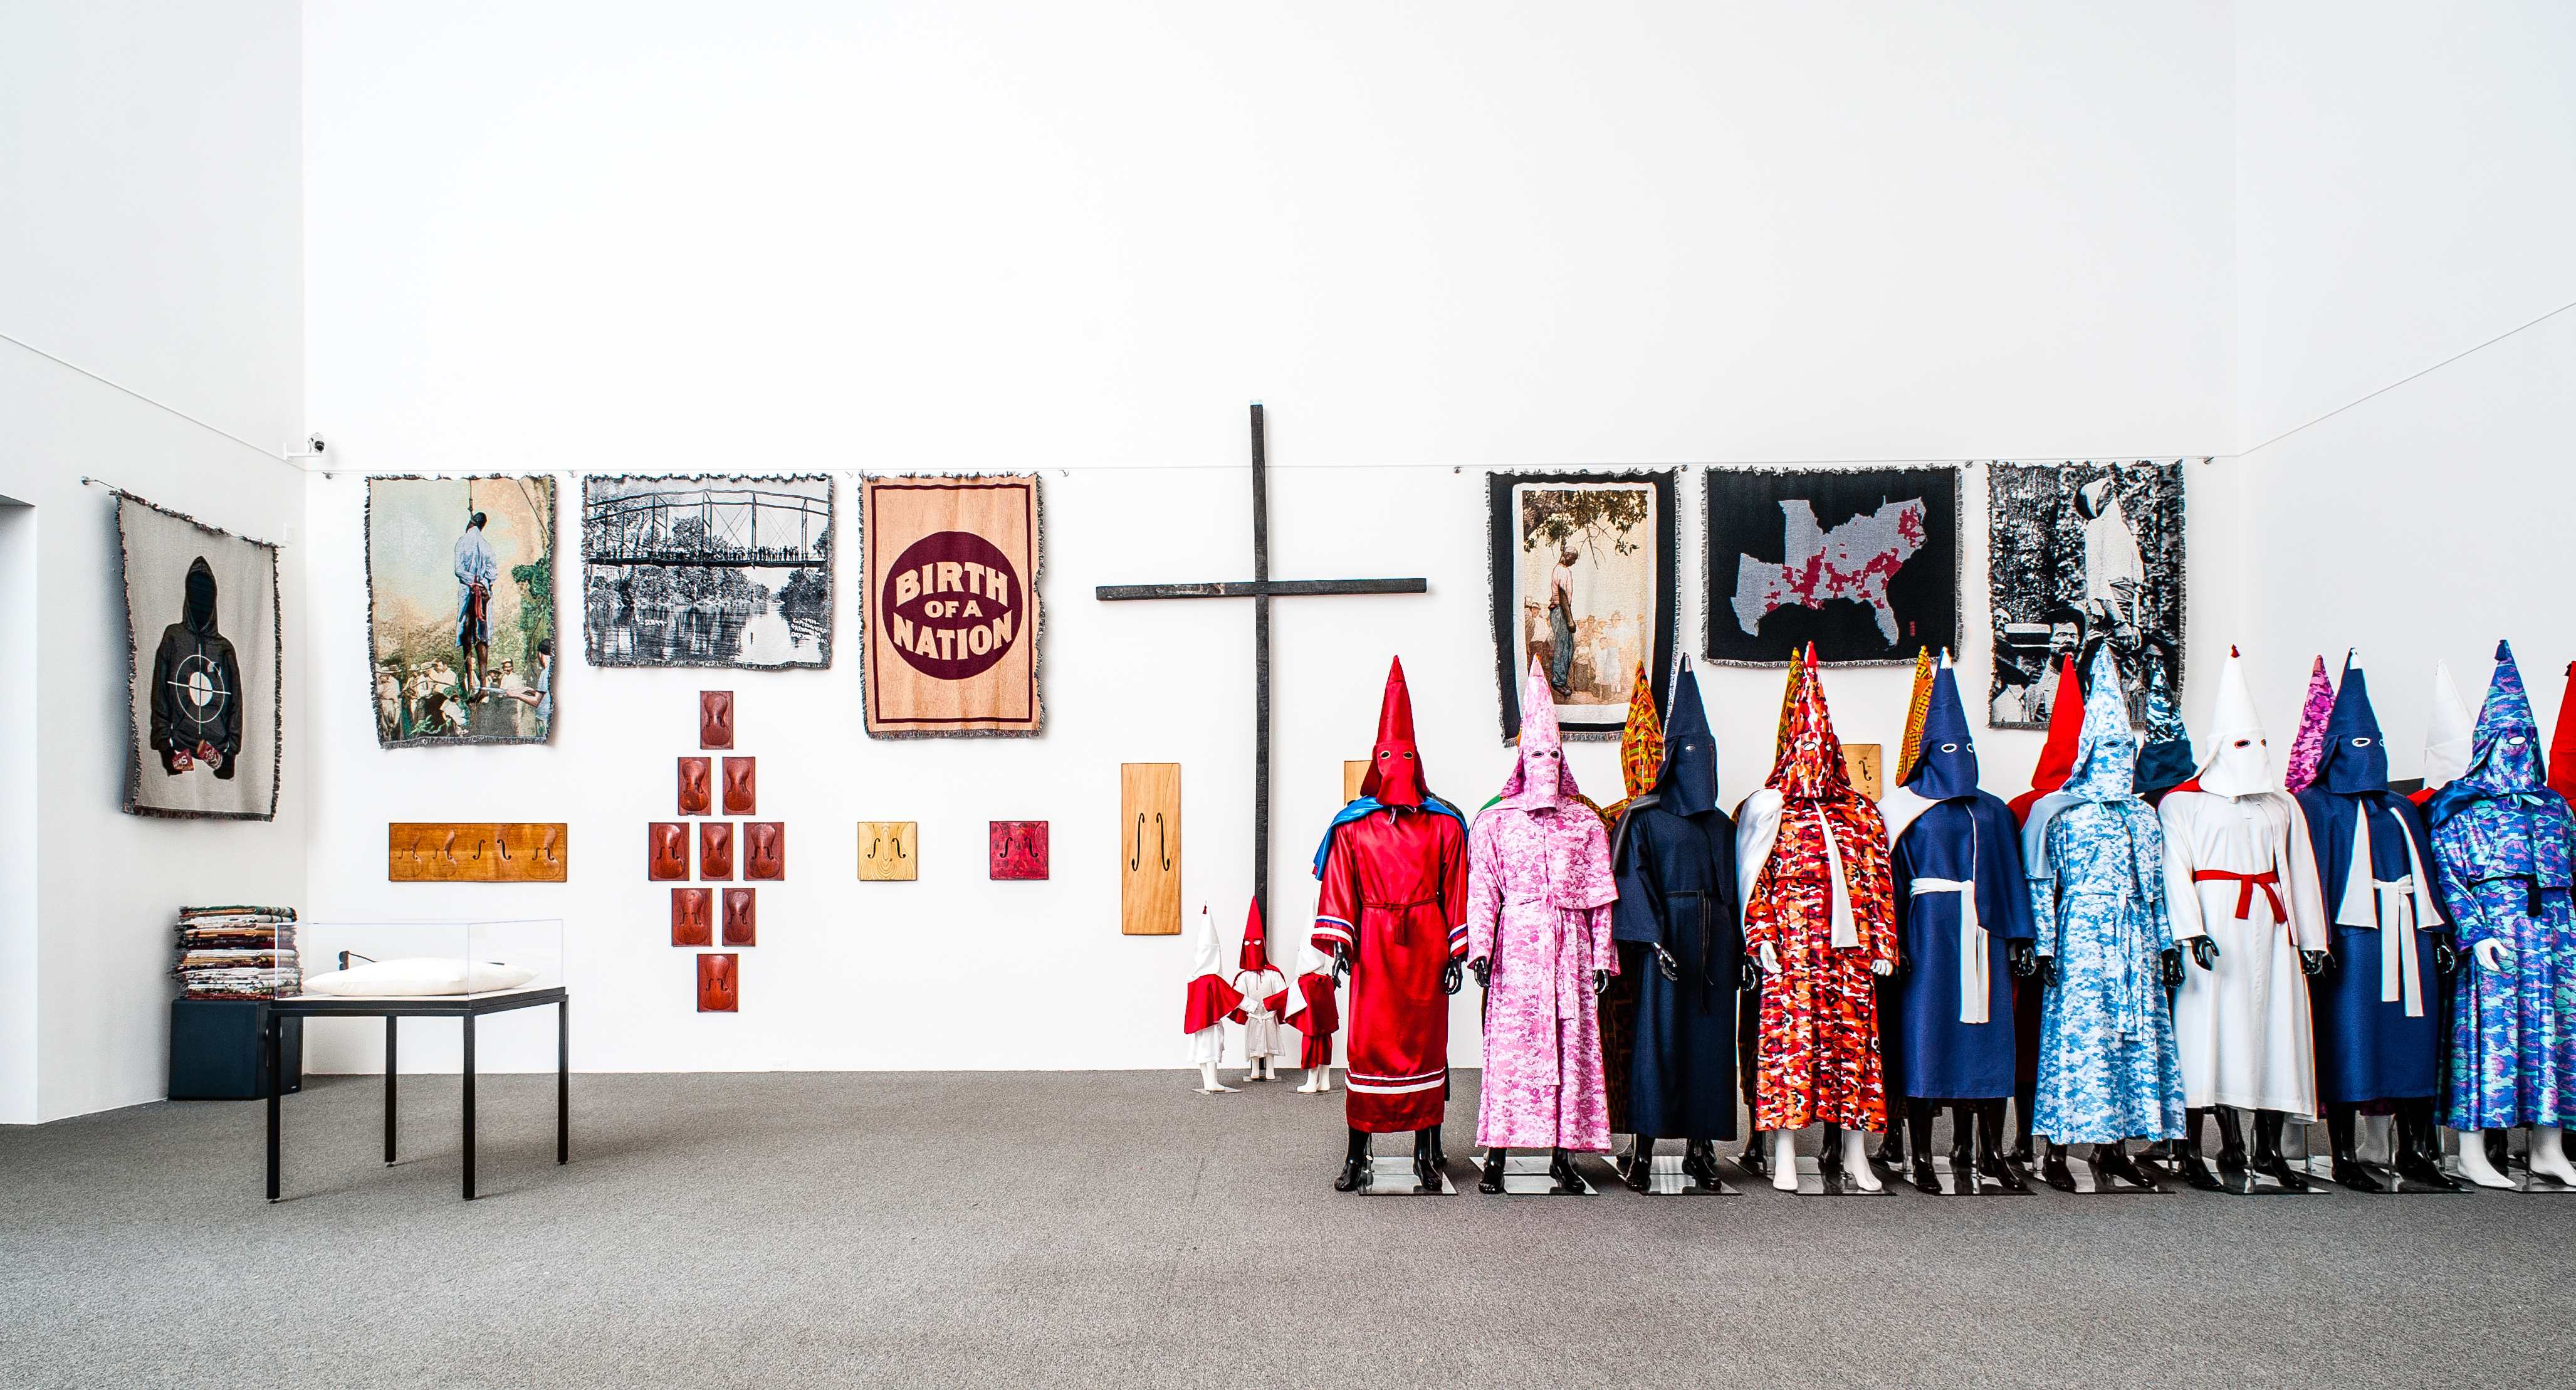 Image of Paul Rucker's exhibition featuring Throws, Birth of a Nation, and other pieces of art